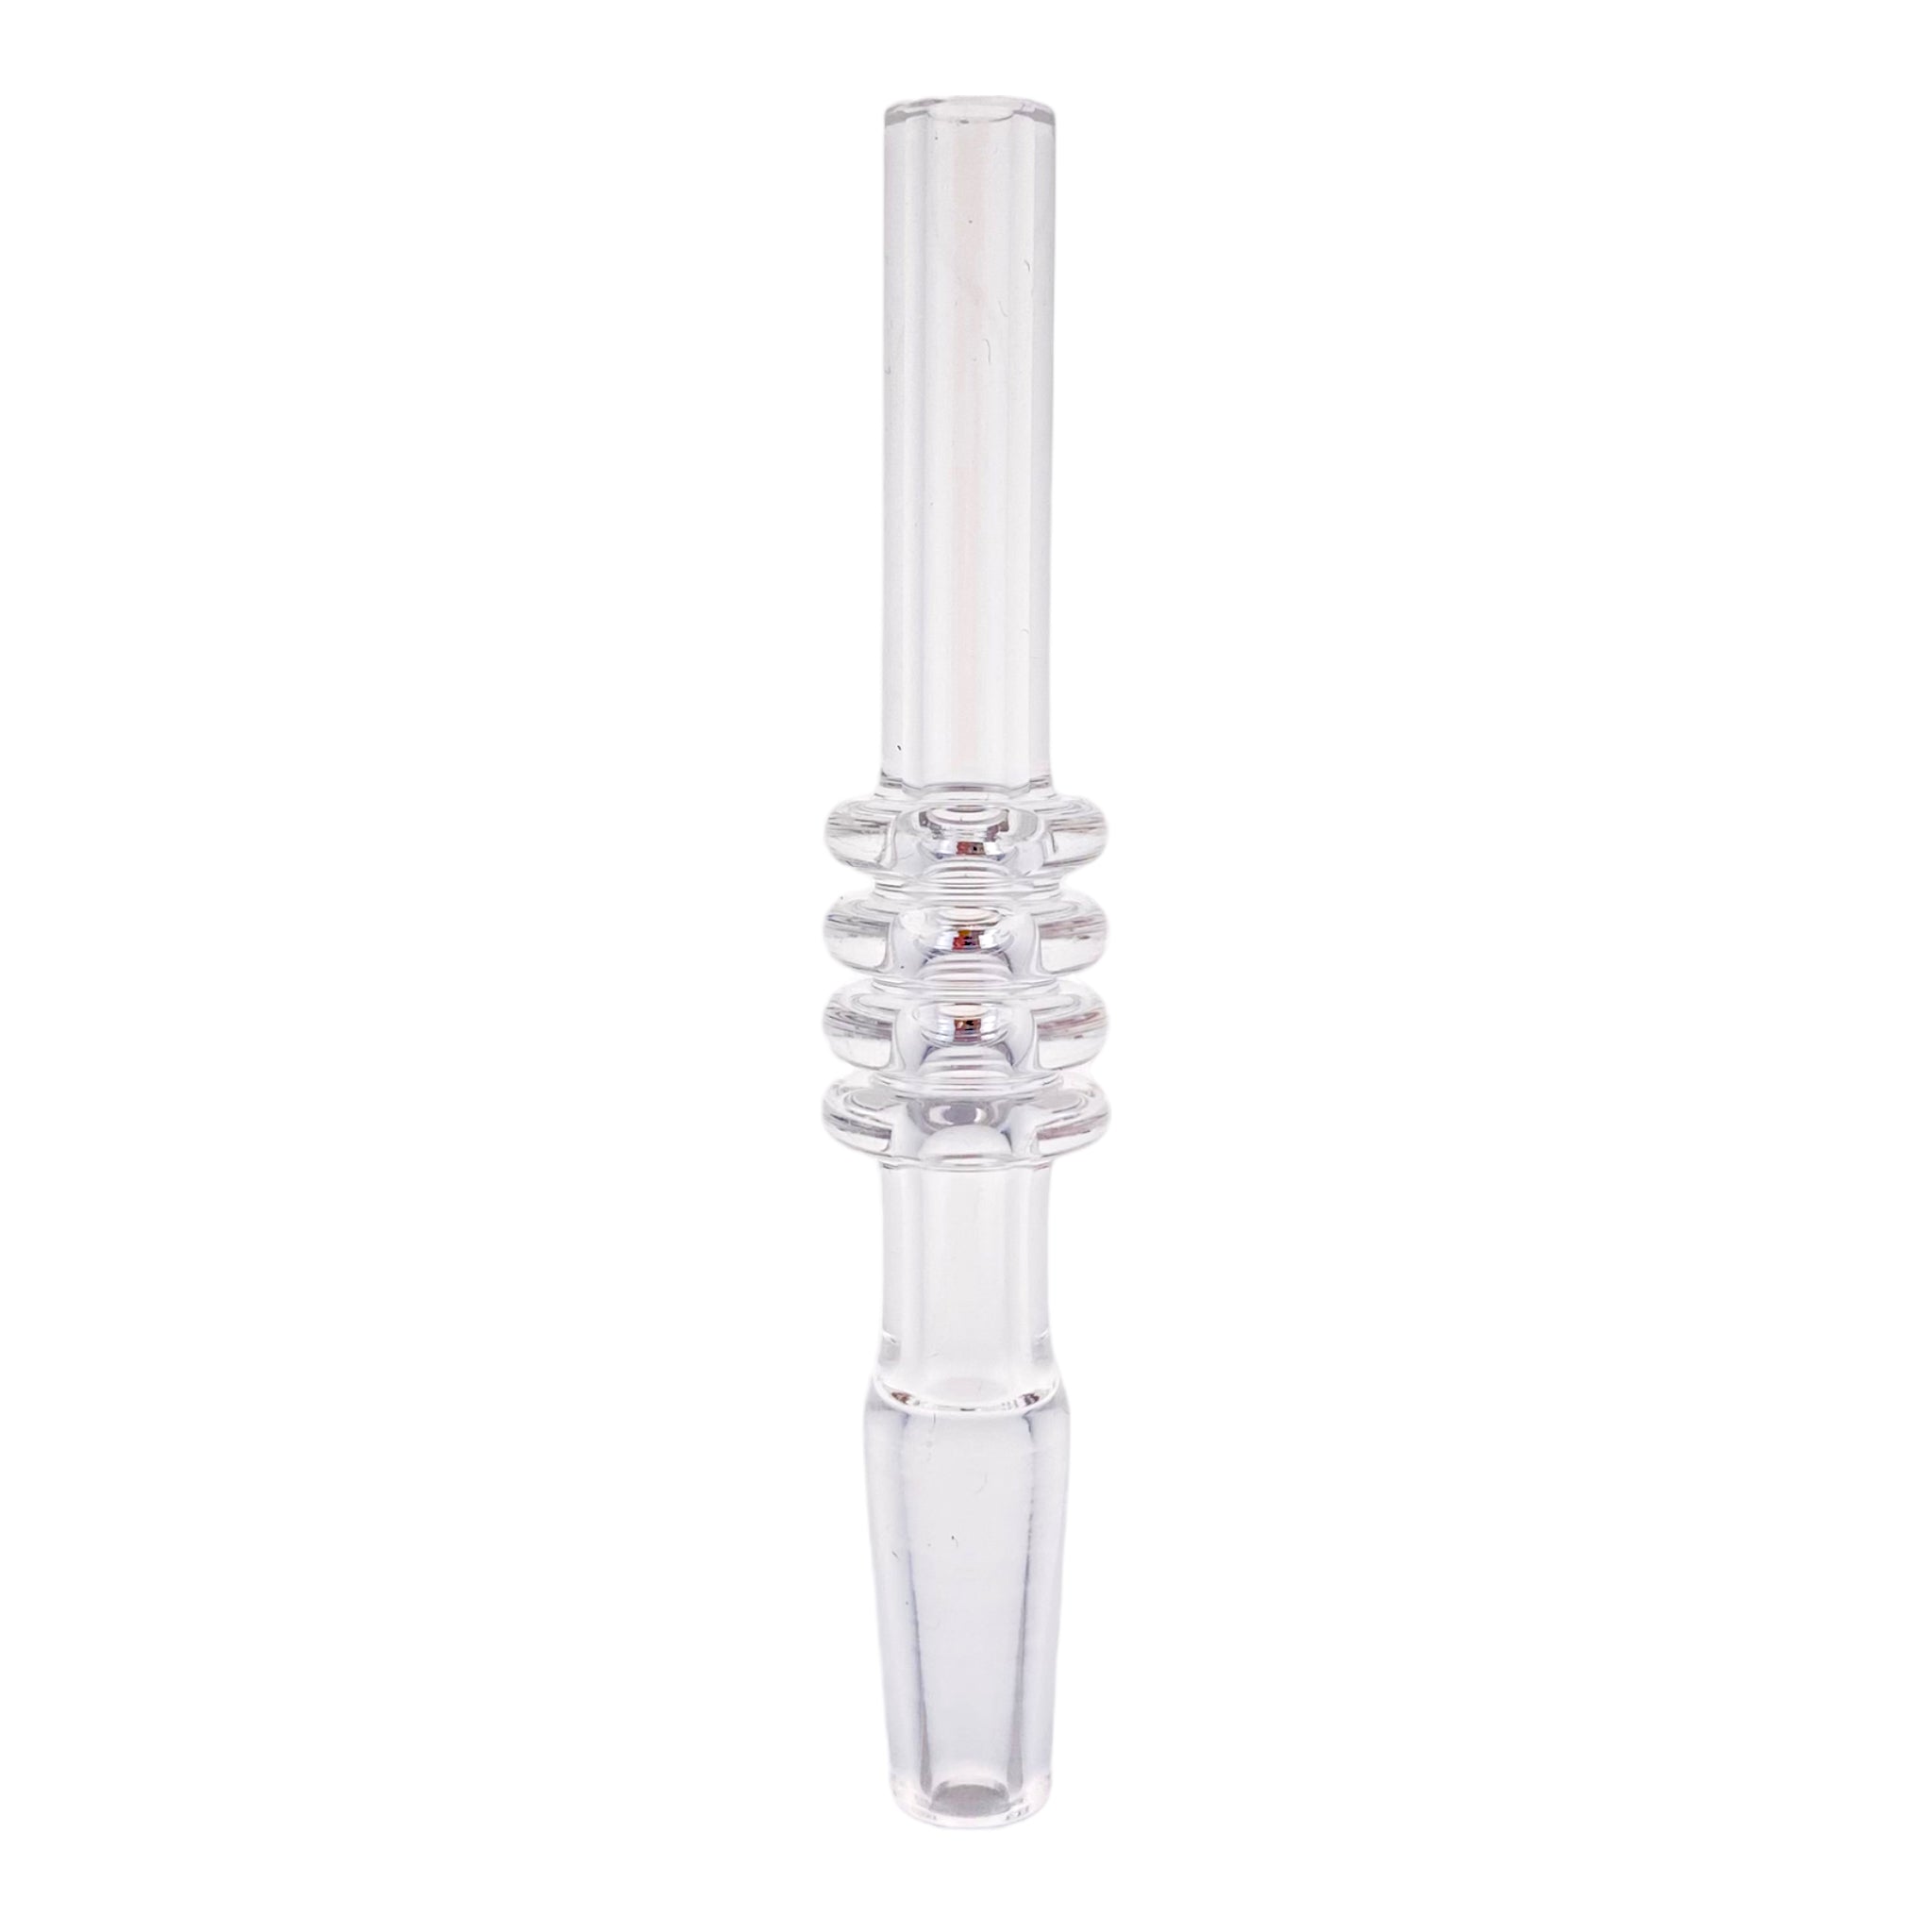 10mm Quartz Nectar Collector Replacement Tip for sale